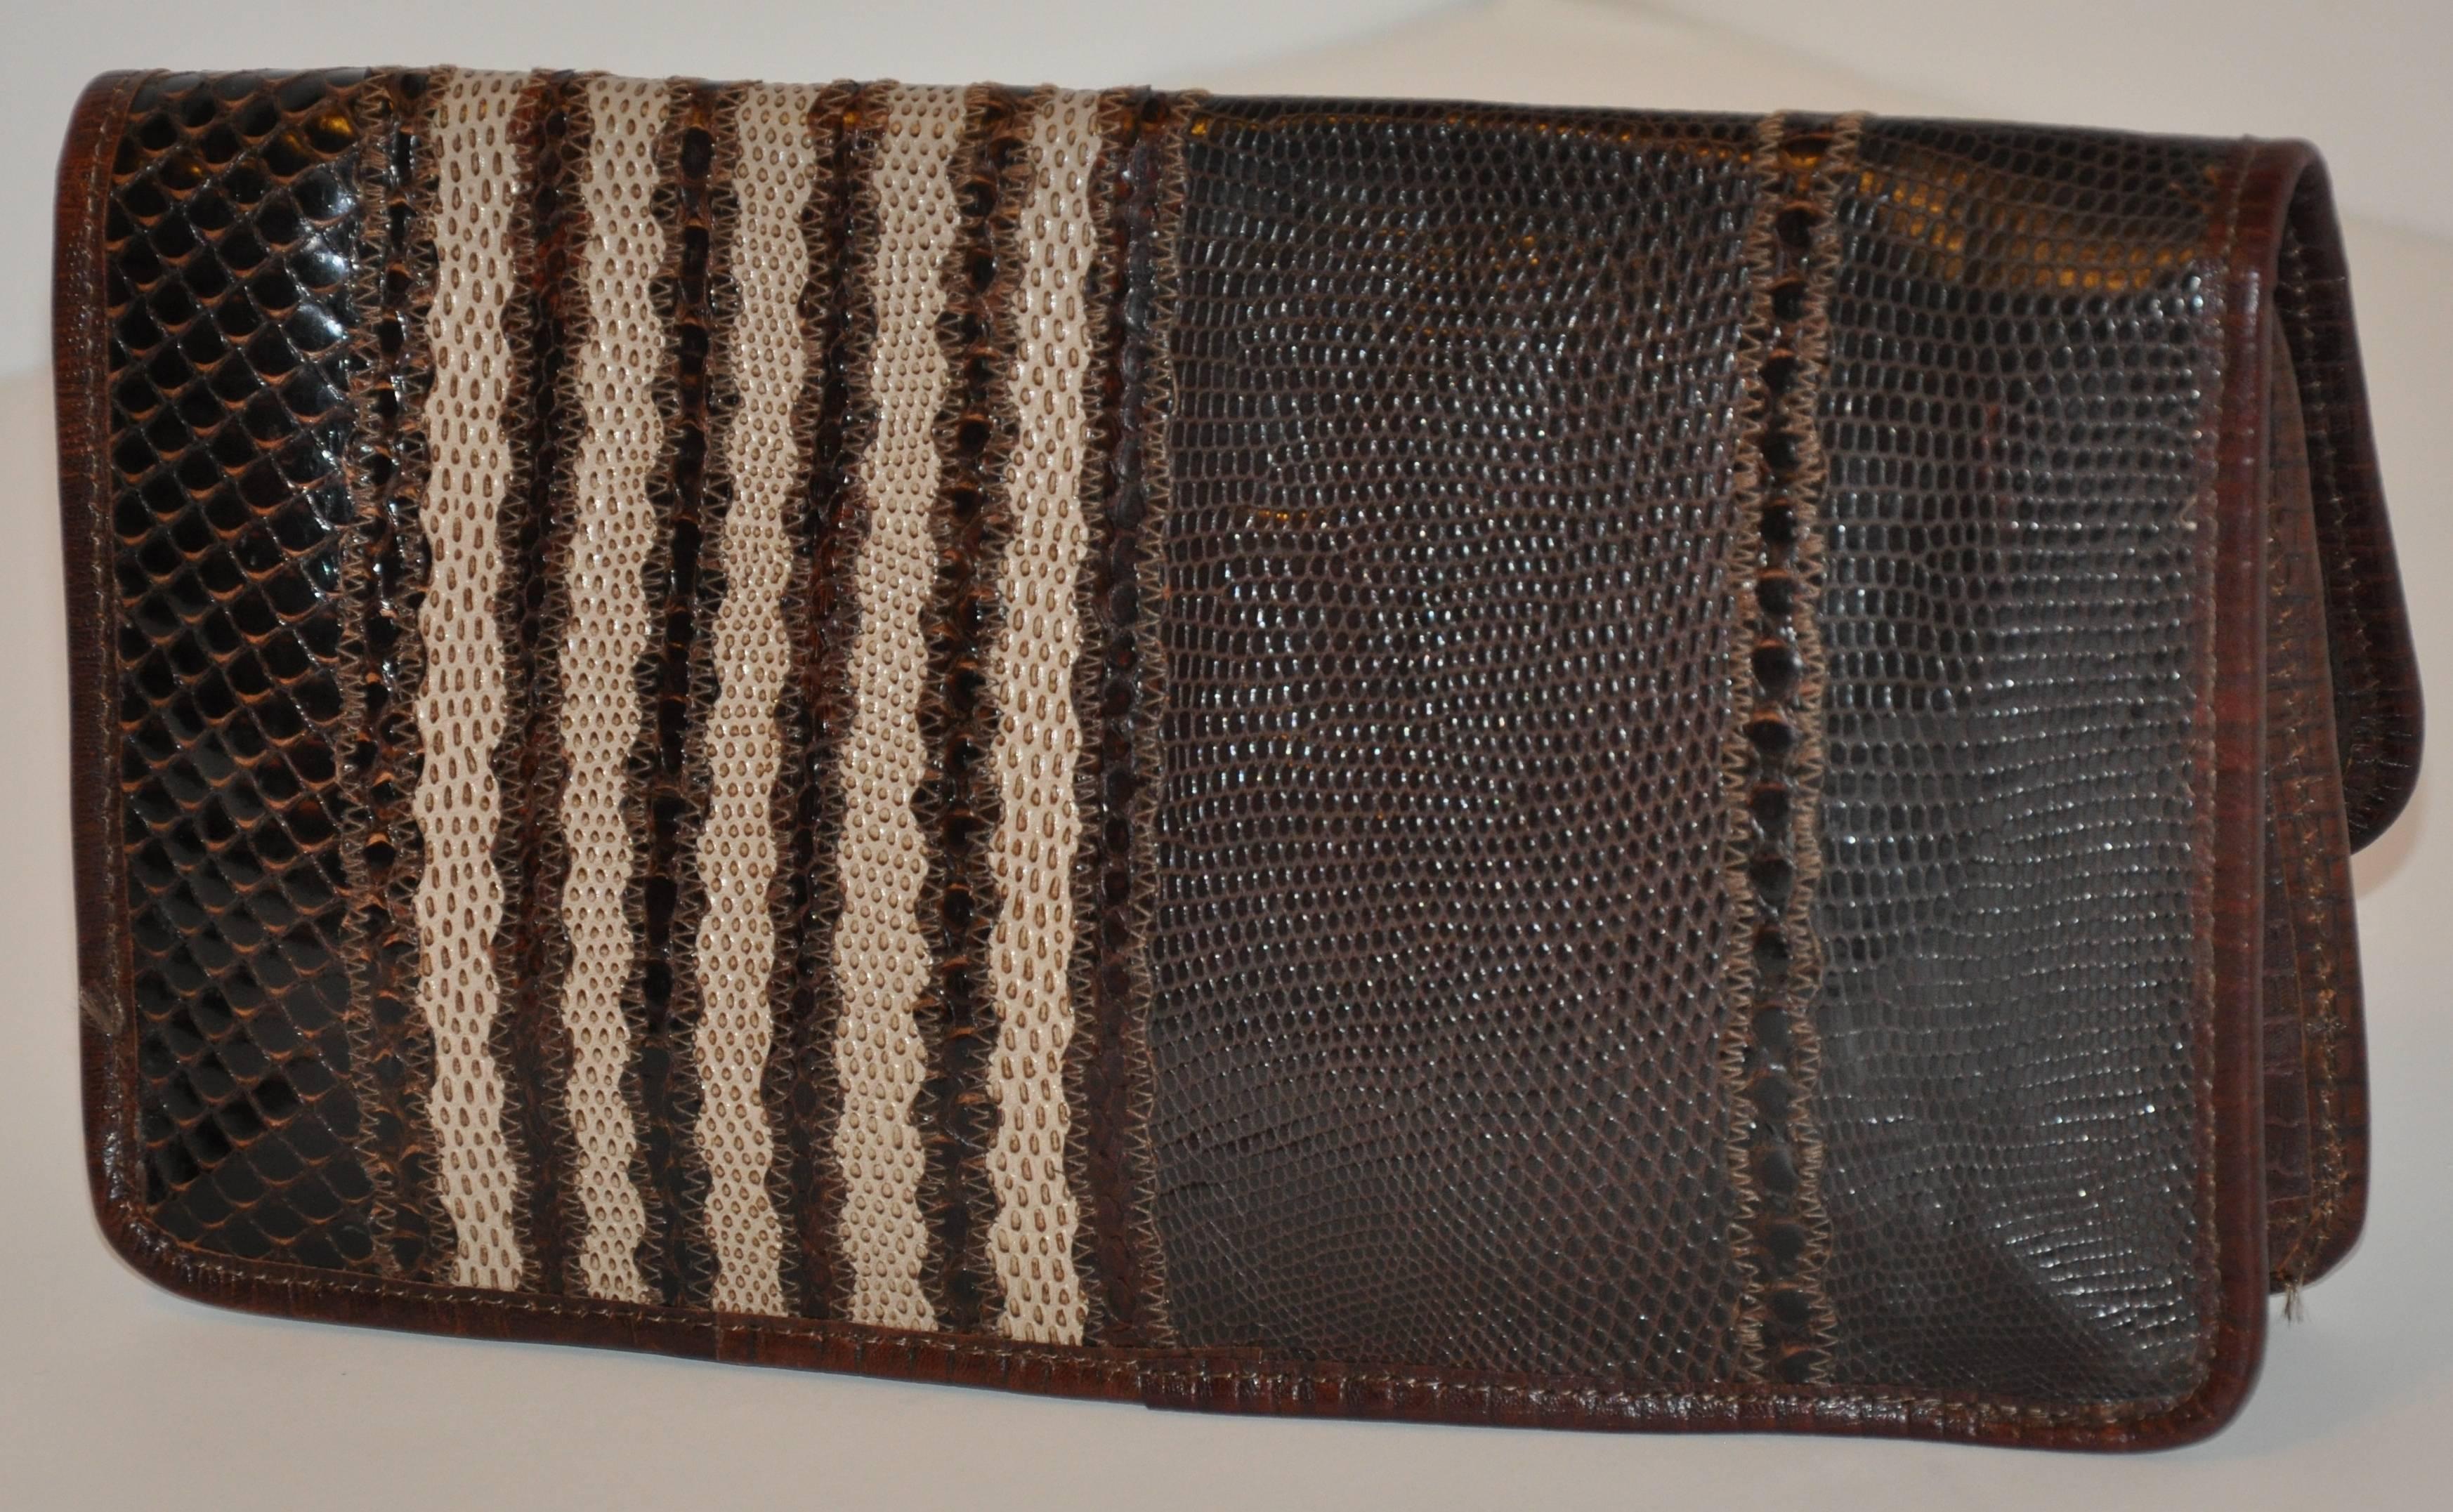        As only Carlos Falchi can, This wonderful multi-texture combination of lizard, snake and pylon skin finished with lambskin leather piping along the edges as well as the interior lining with shades of coco brown and browns. This wonderful